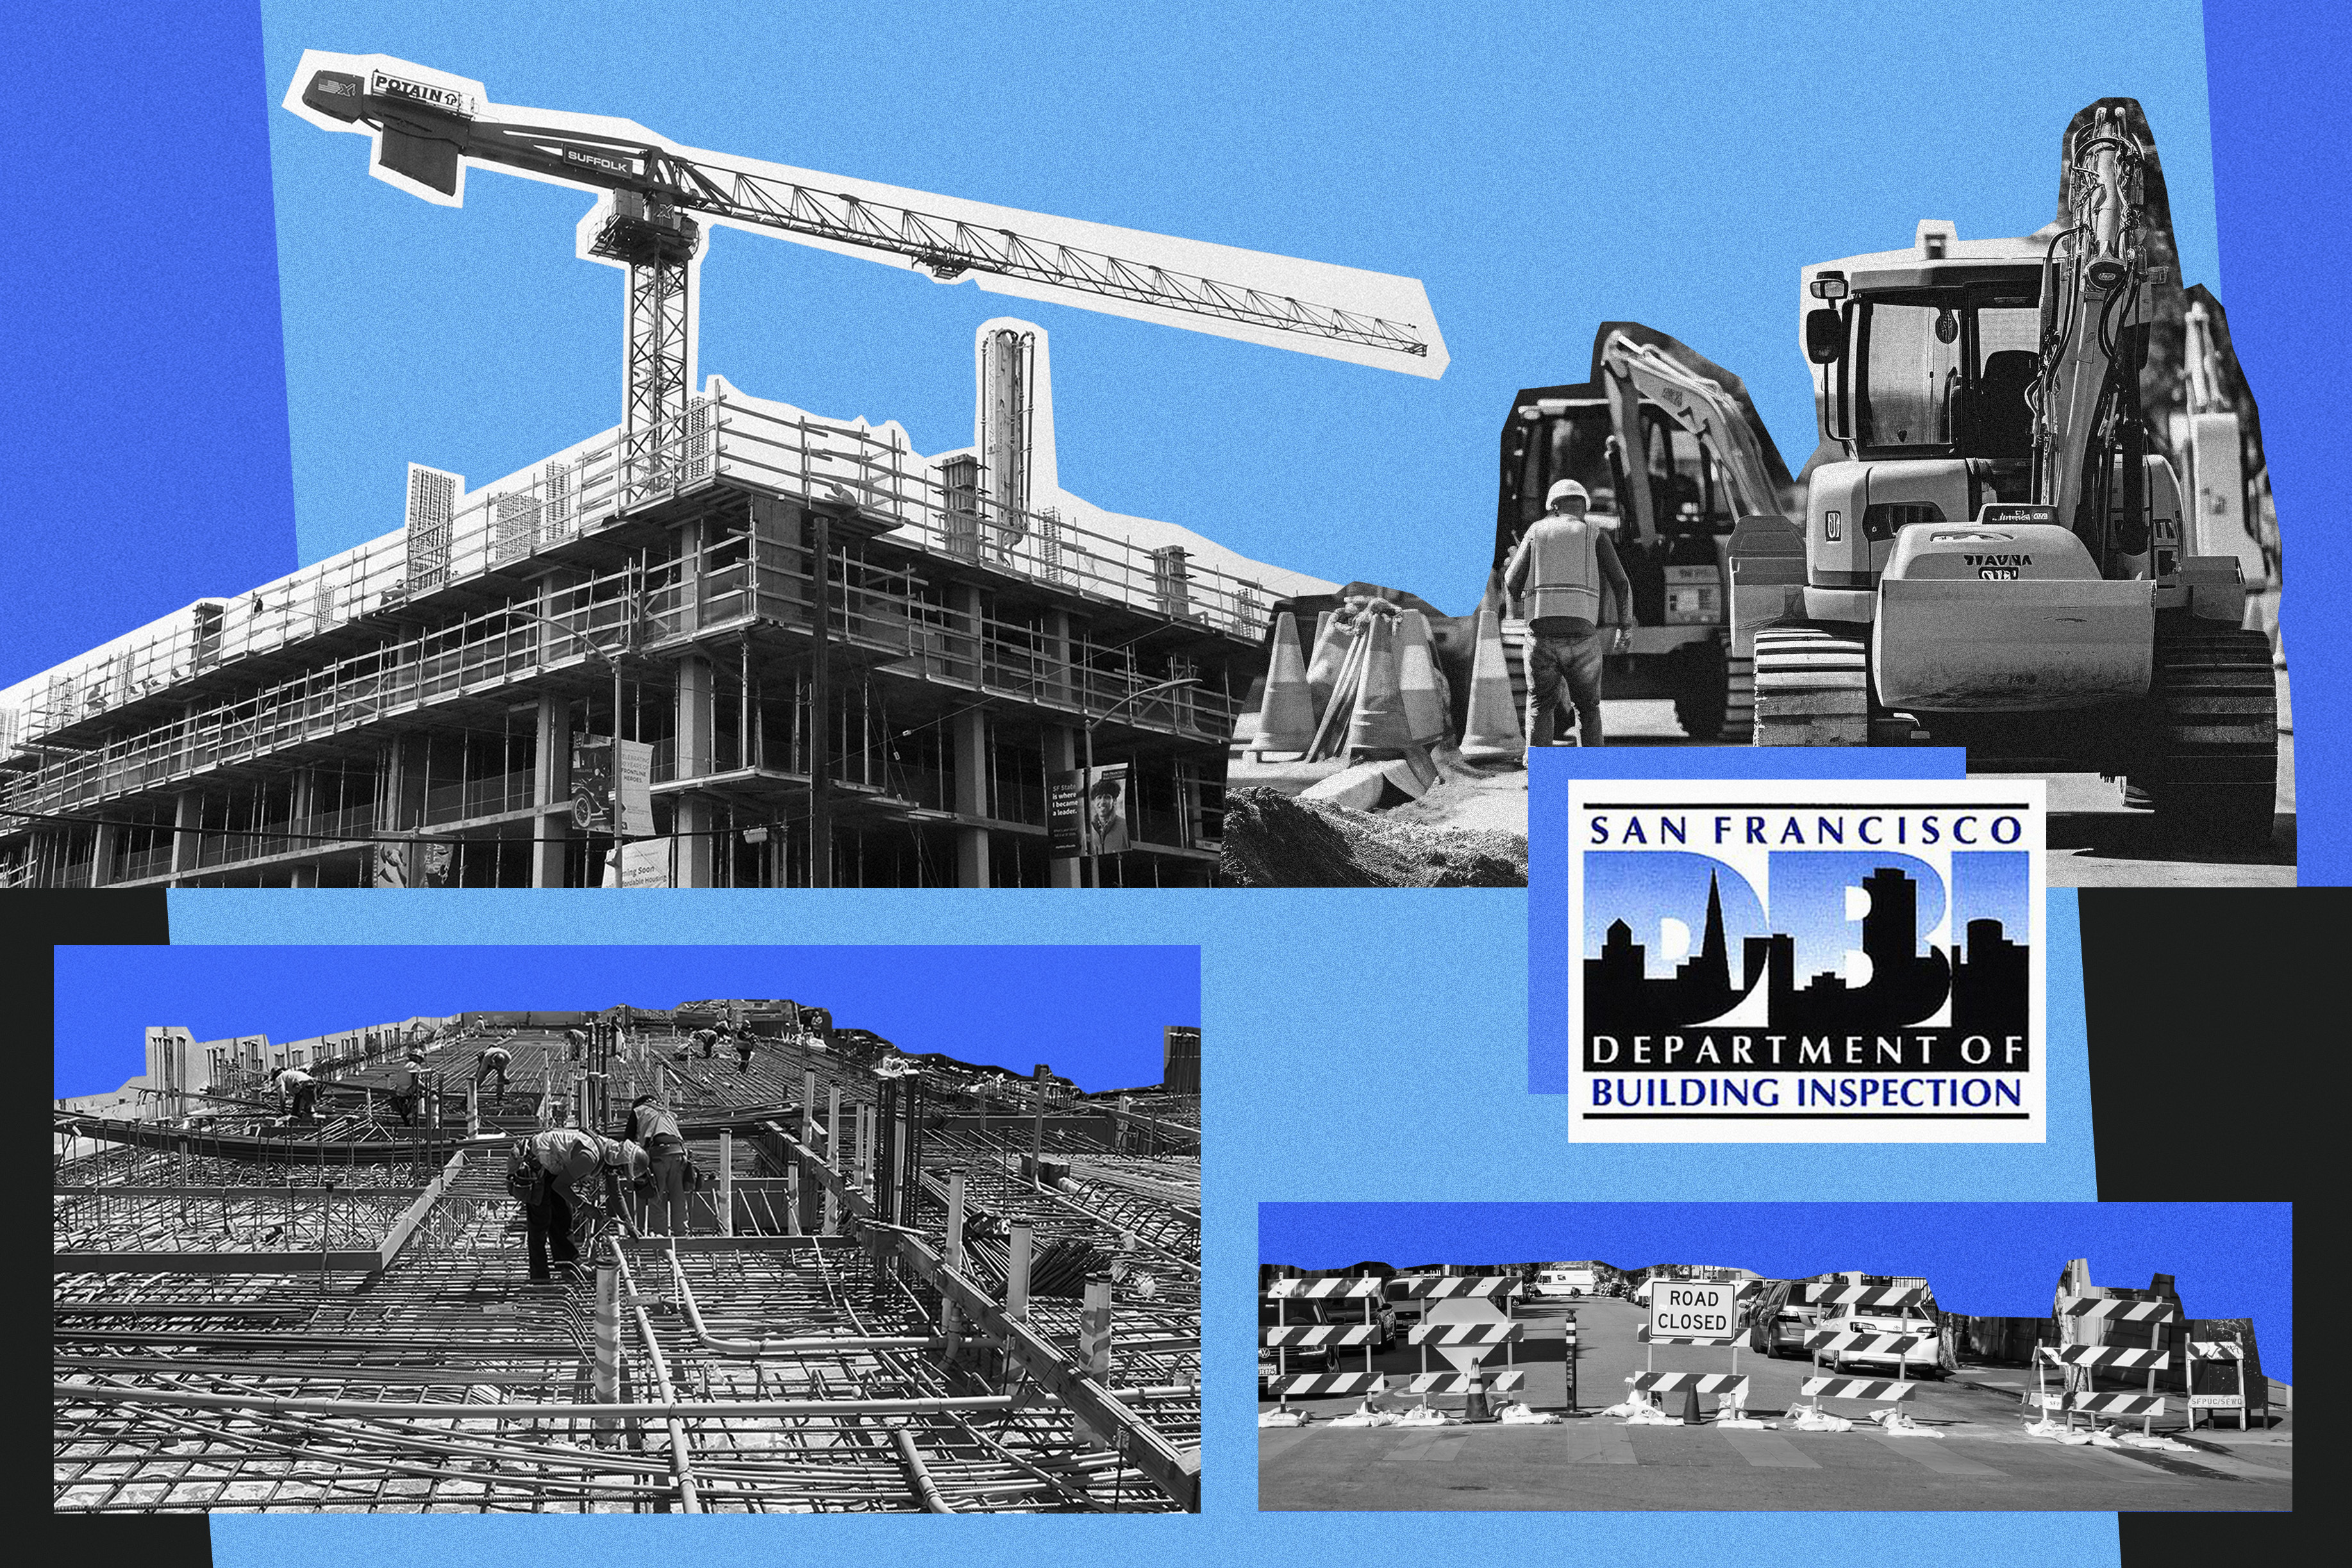 Buildings under construction in an illustration with construction equipment.